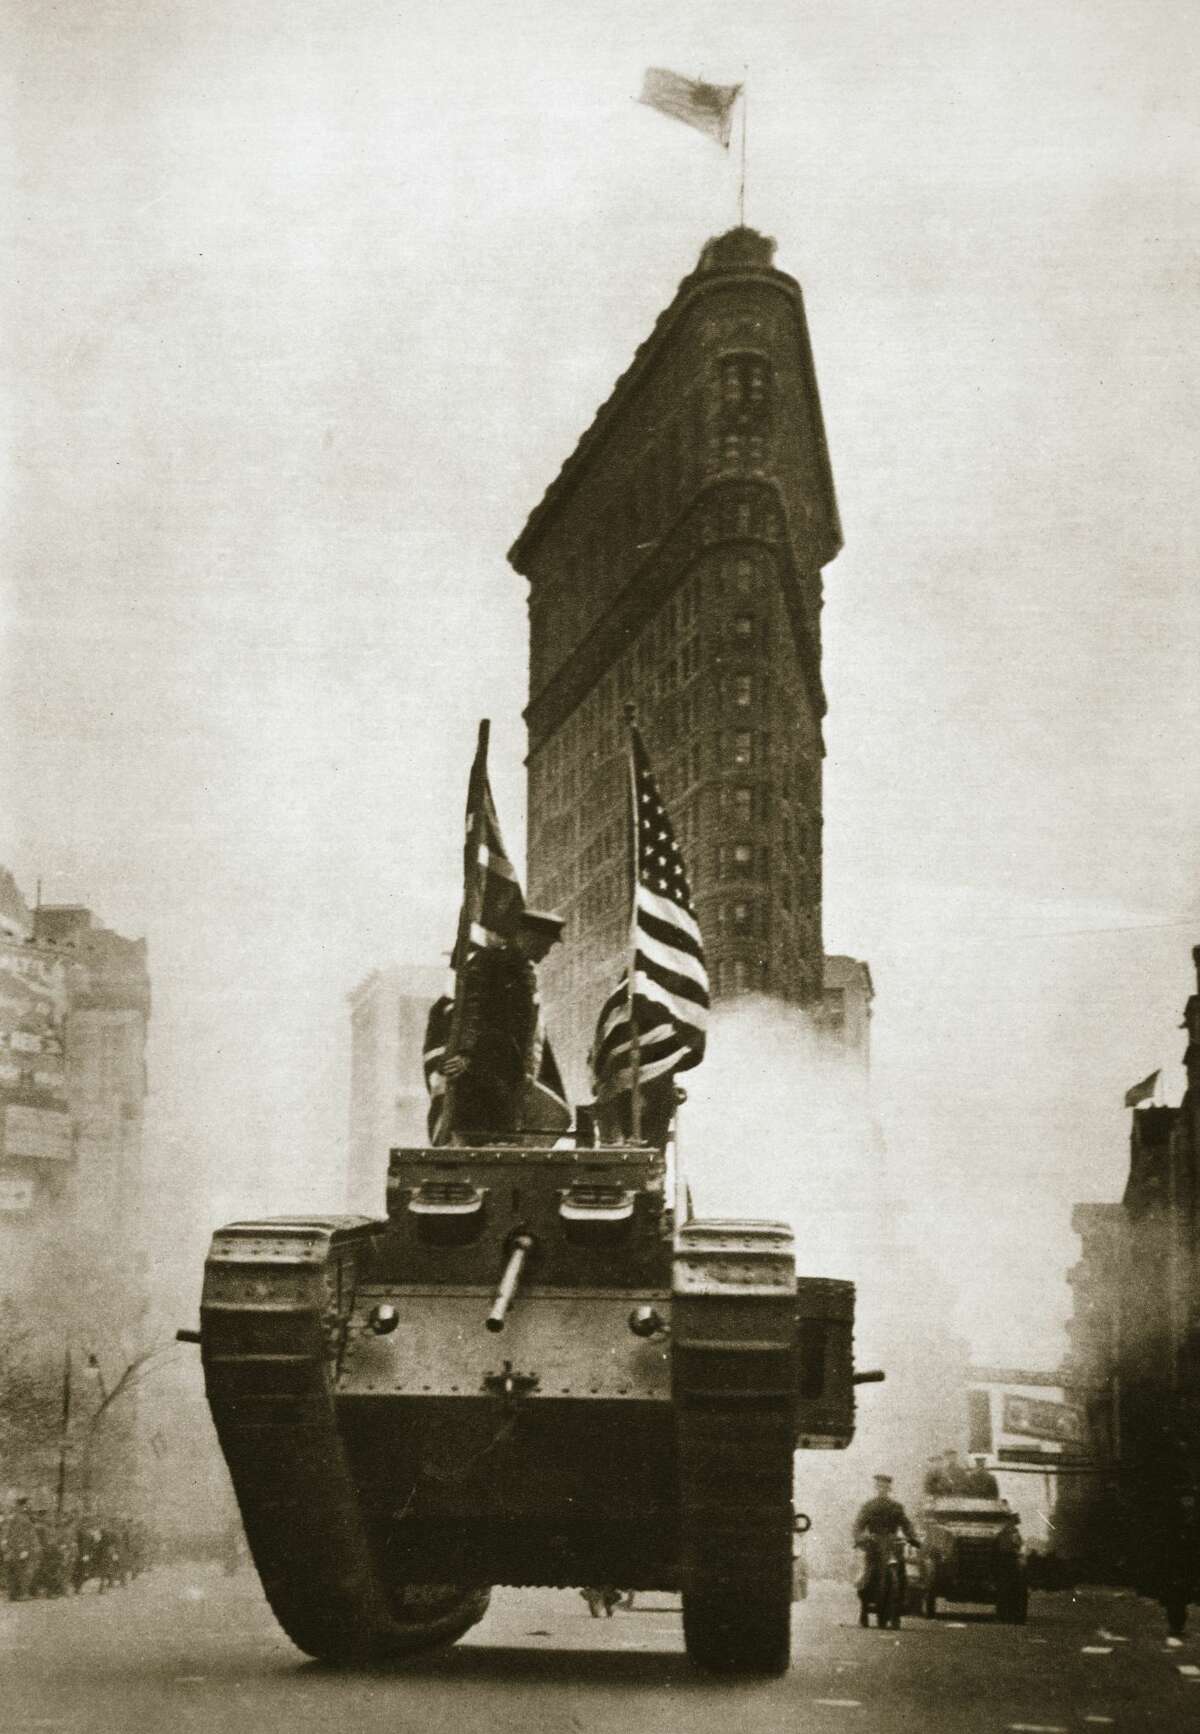 British tank 'Britannia' on Fifth Avenue, New York City, circa 1918. The tank was in New York to aid the Liberty Loan drive. Liberty Loans were war bonds sold in the United States from 1917-1918 to support the allied war effort. Americans were encouraged to buy the bonds as their patriotic duty and they raised around $17 billion.